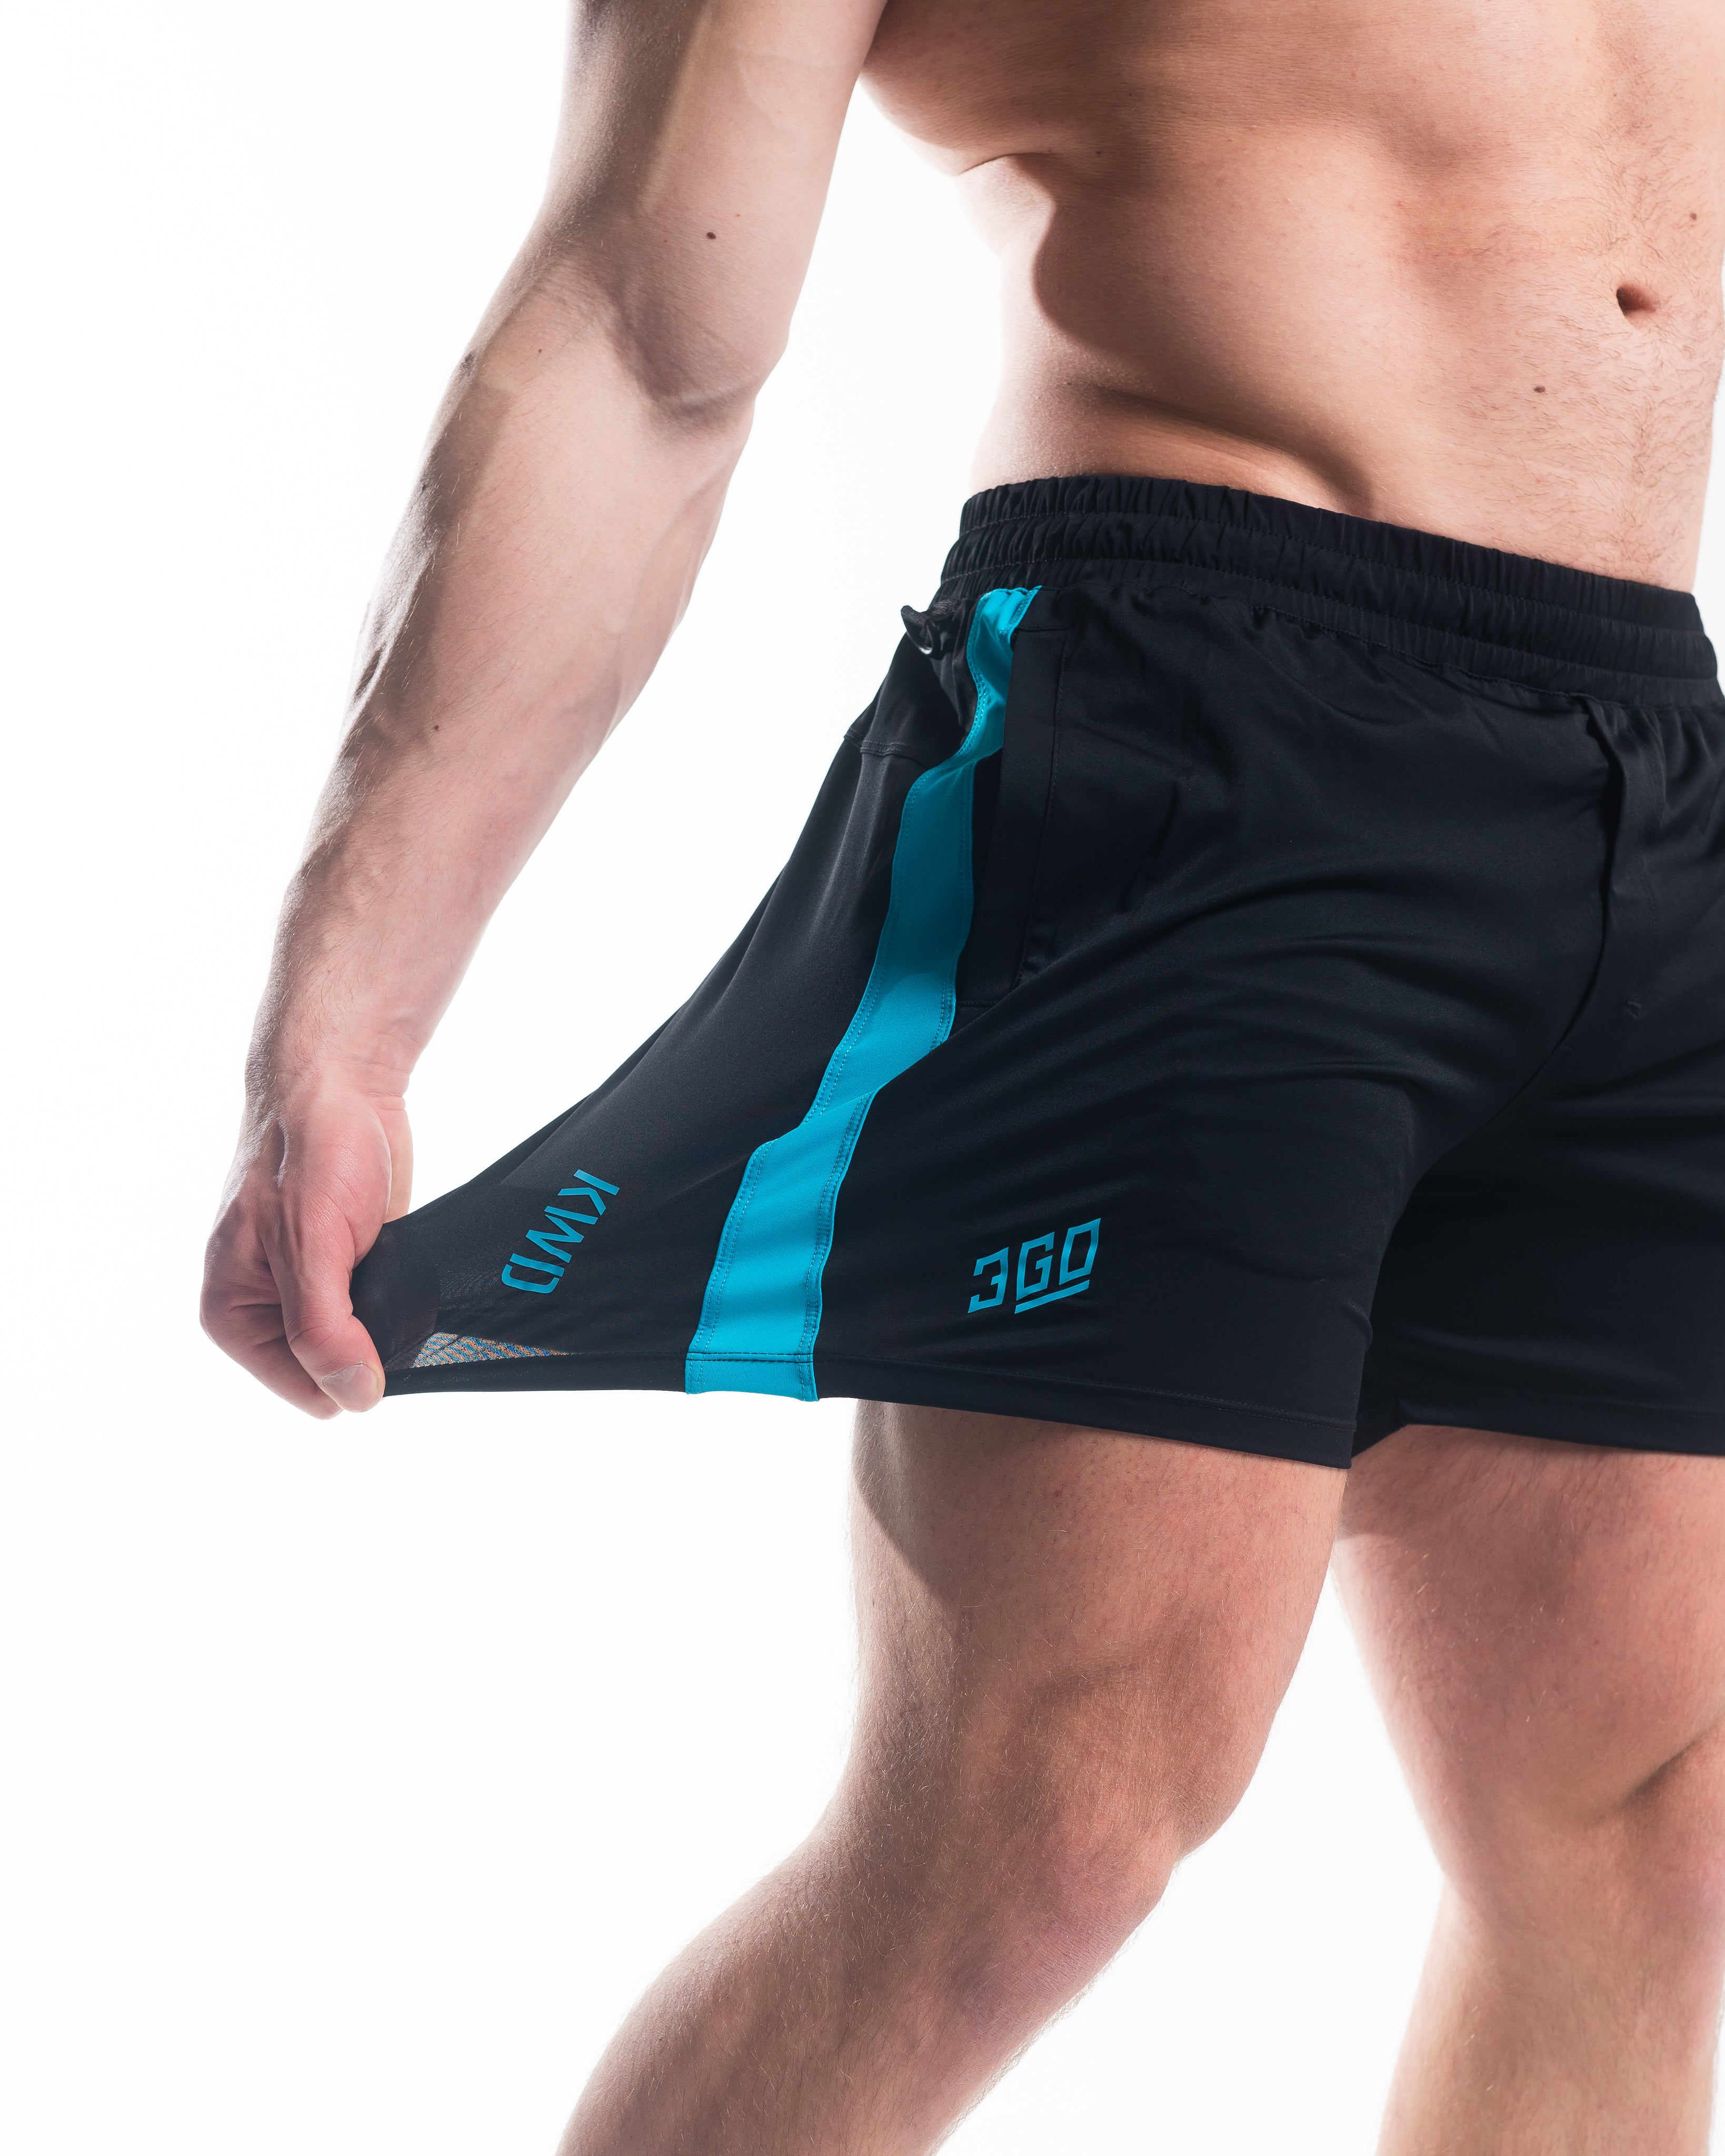 360GO was created to provide the flexibility for all movements in your training while offering comfort. These shorts offer 360 degrees of stretch in all angles and allow you to remain comfortable without limiting any movement in both training and life environments. Designed with a wide drawstring to easily adjust your waist without slipping. Purchase 360GO KWD Squat Shorts from A7 UK. All A7 Powerlifting Equipment shipping to UK, Norway, Switzerland and Iceland.